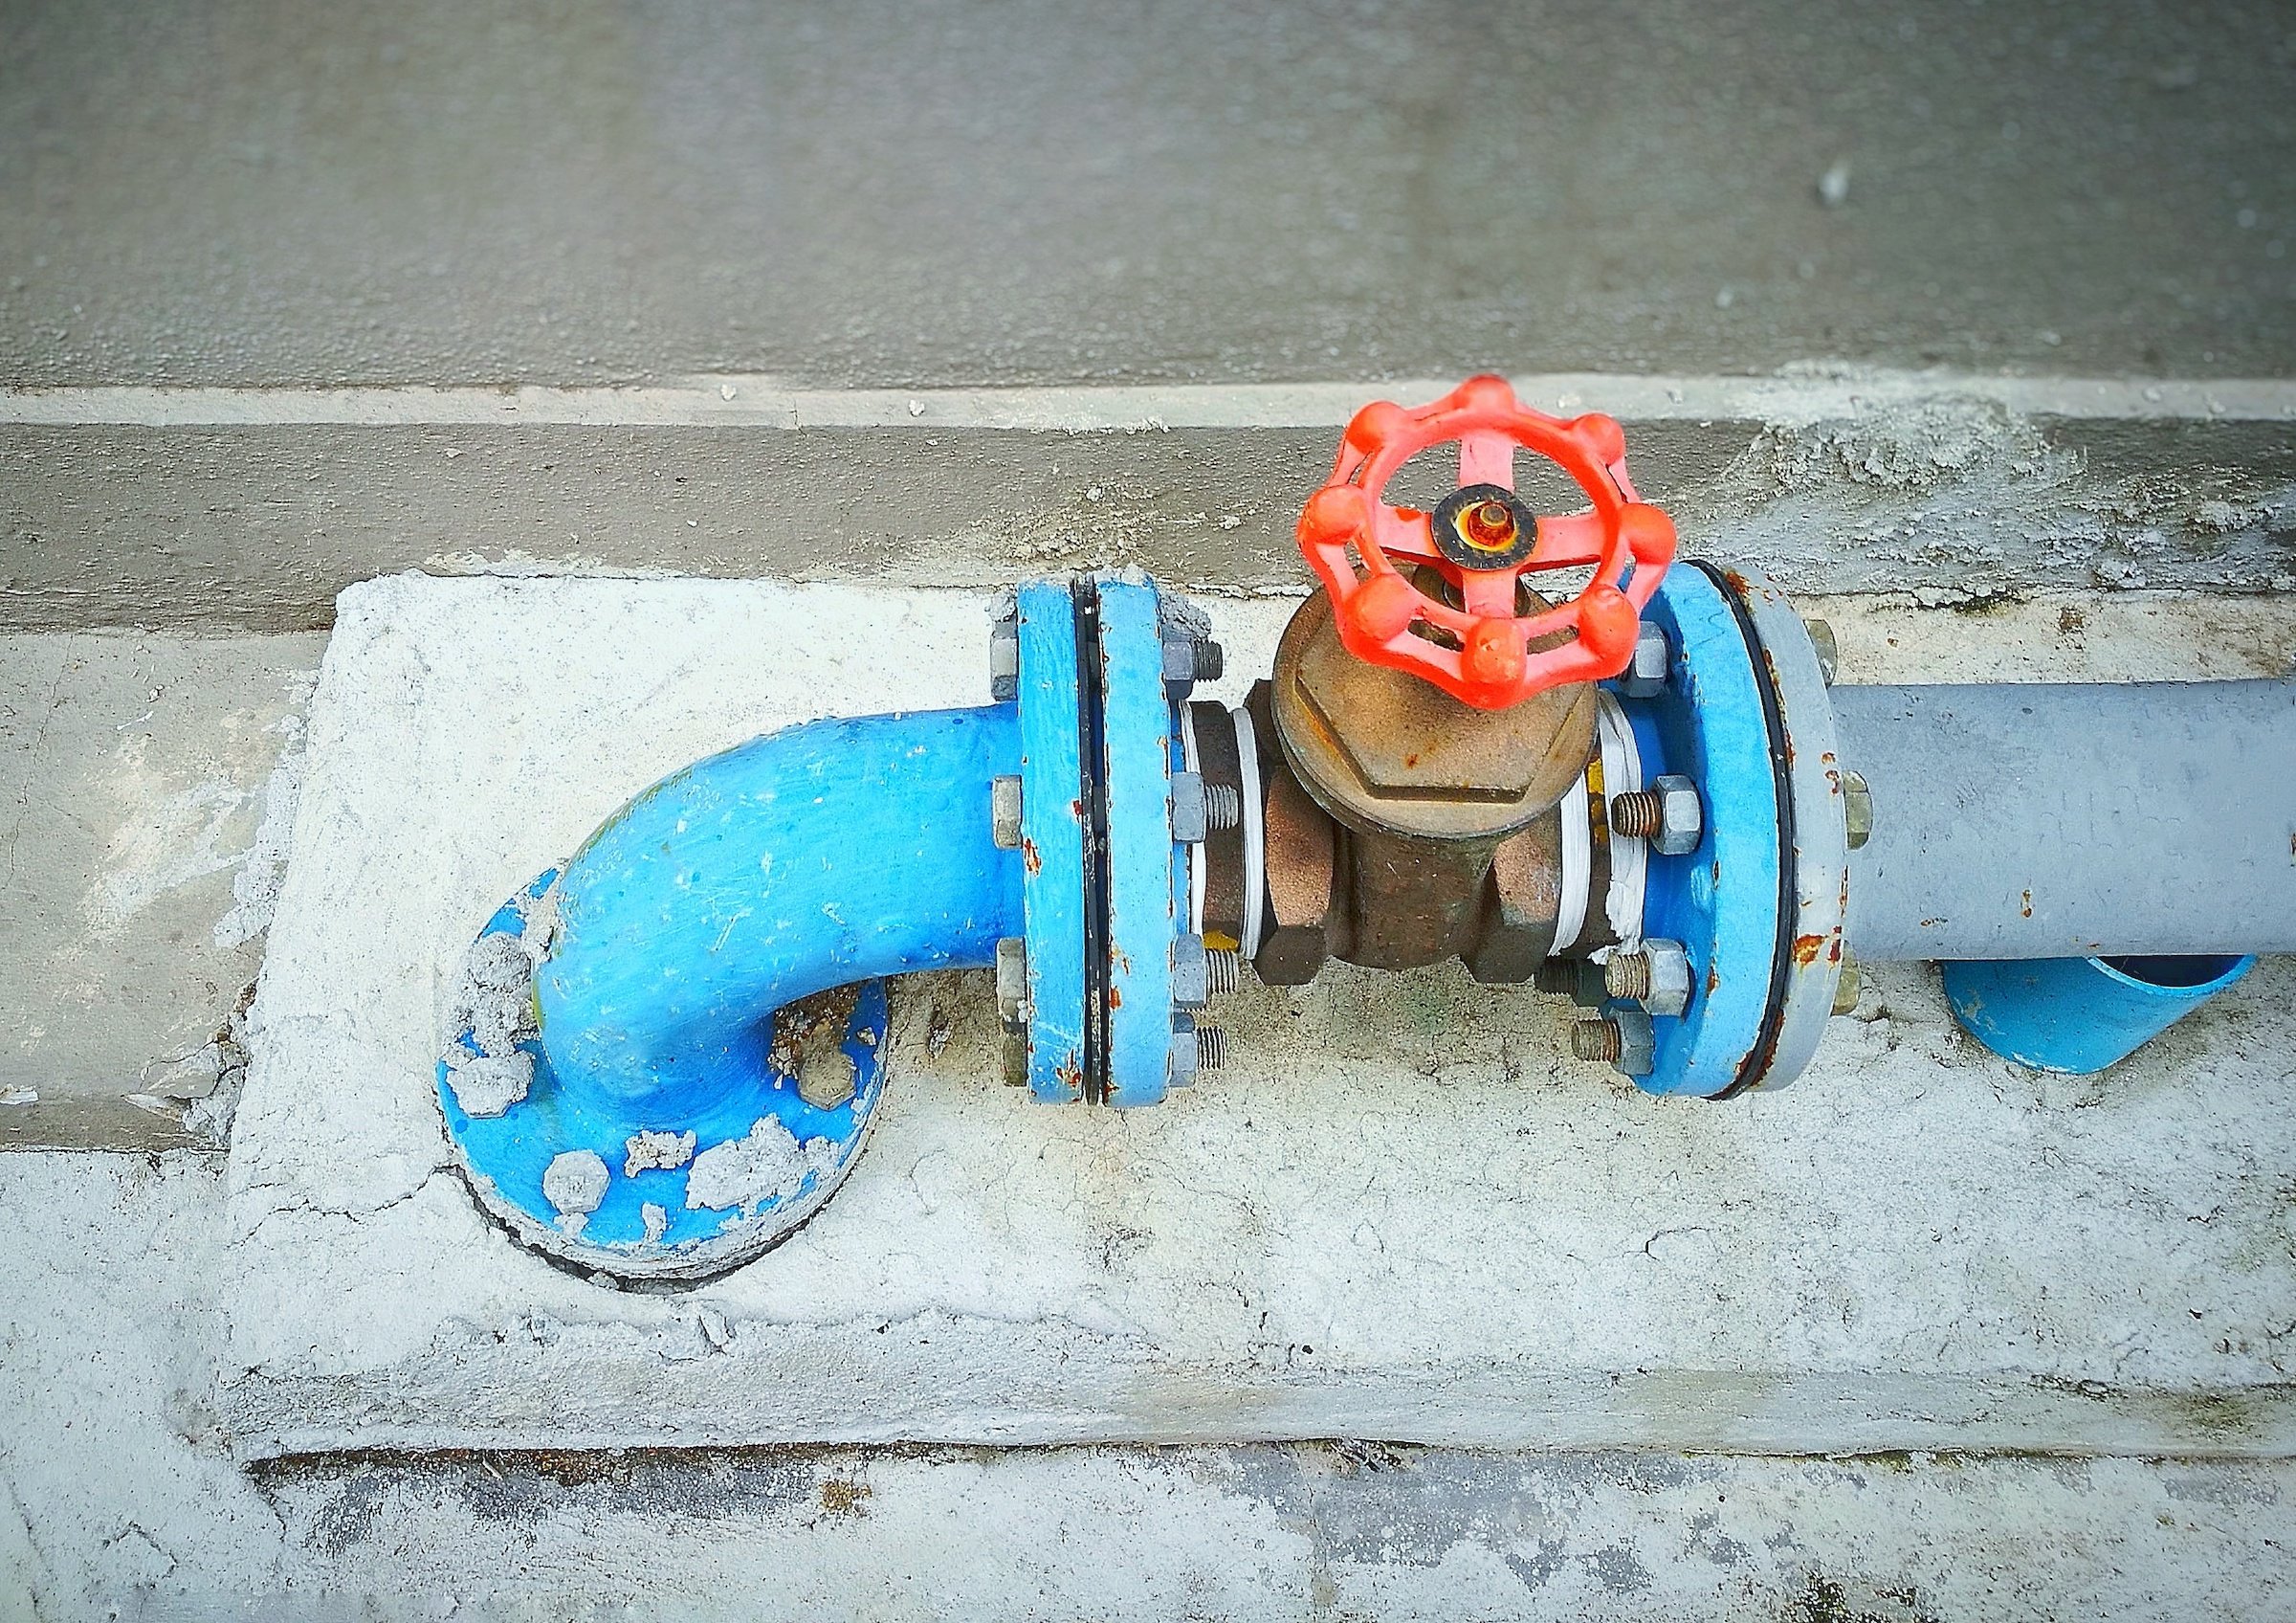 Plumbing tips for new homeowners: learn how to shut off the main water valve